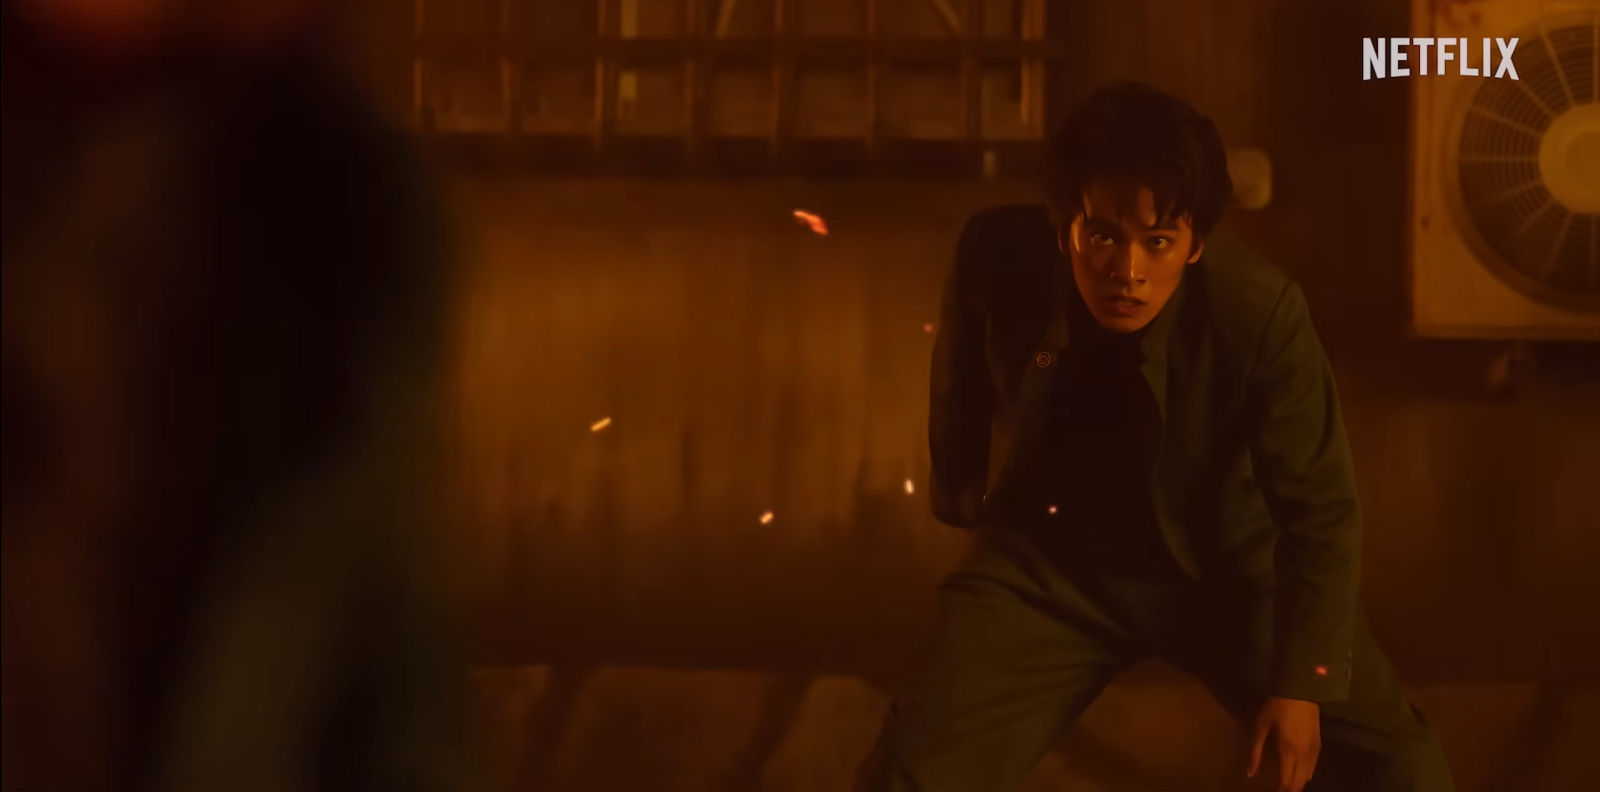 THE YU YU HAKUSHO LIVE ACTION TRAILER IS OUT! WHERE'S THE DARK